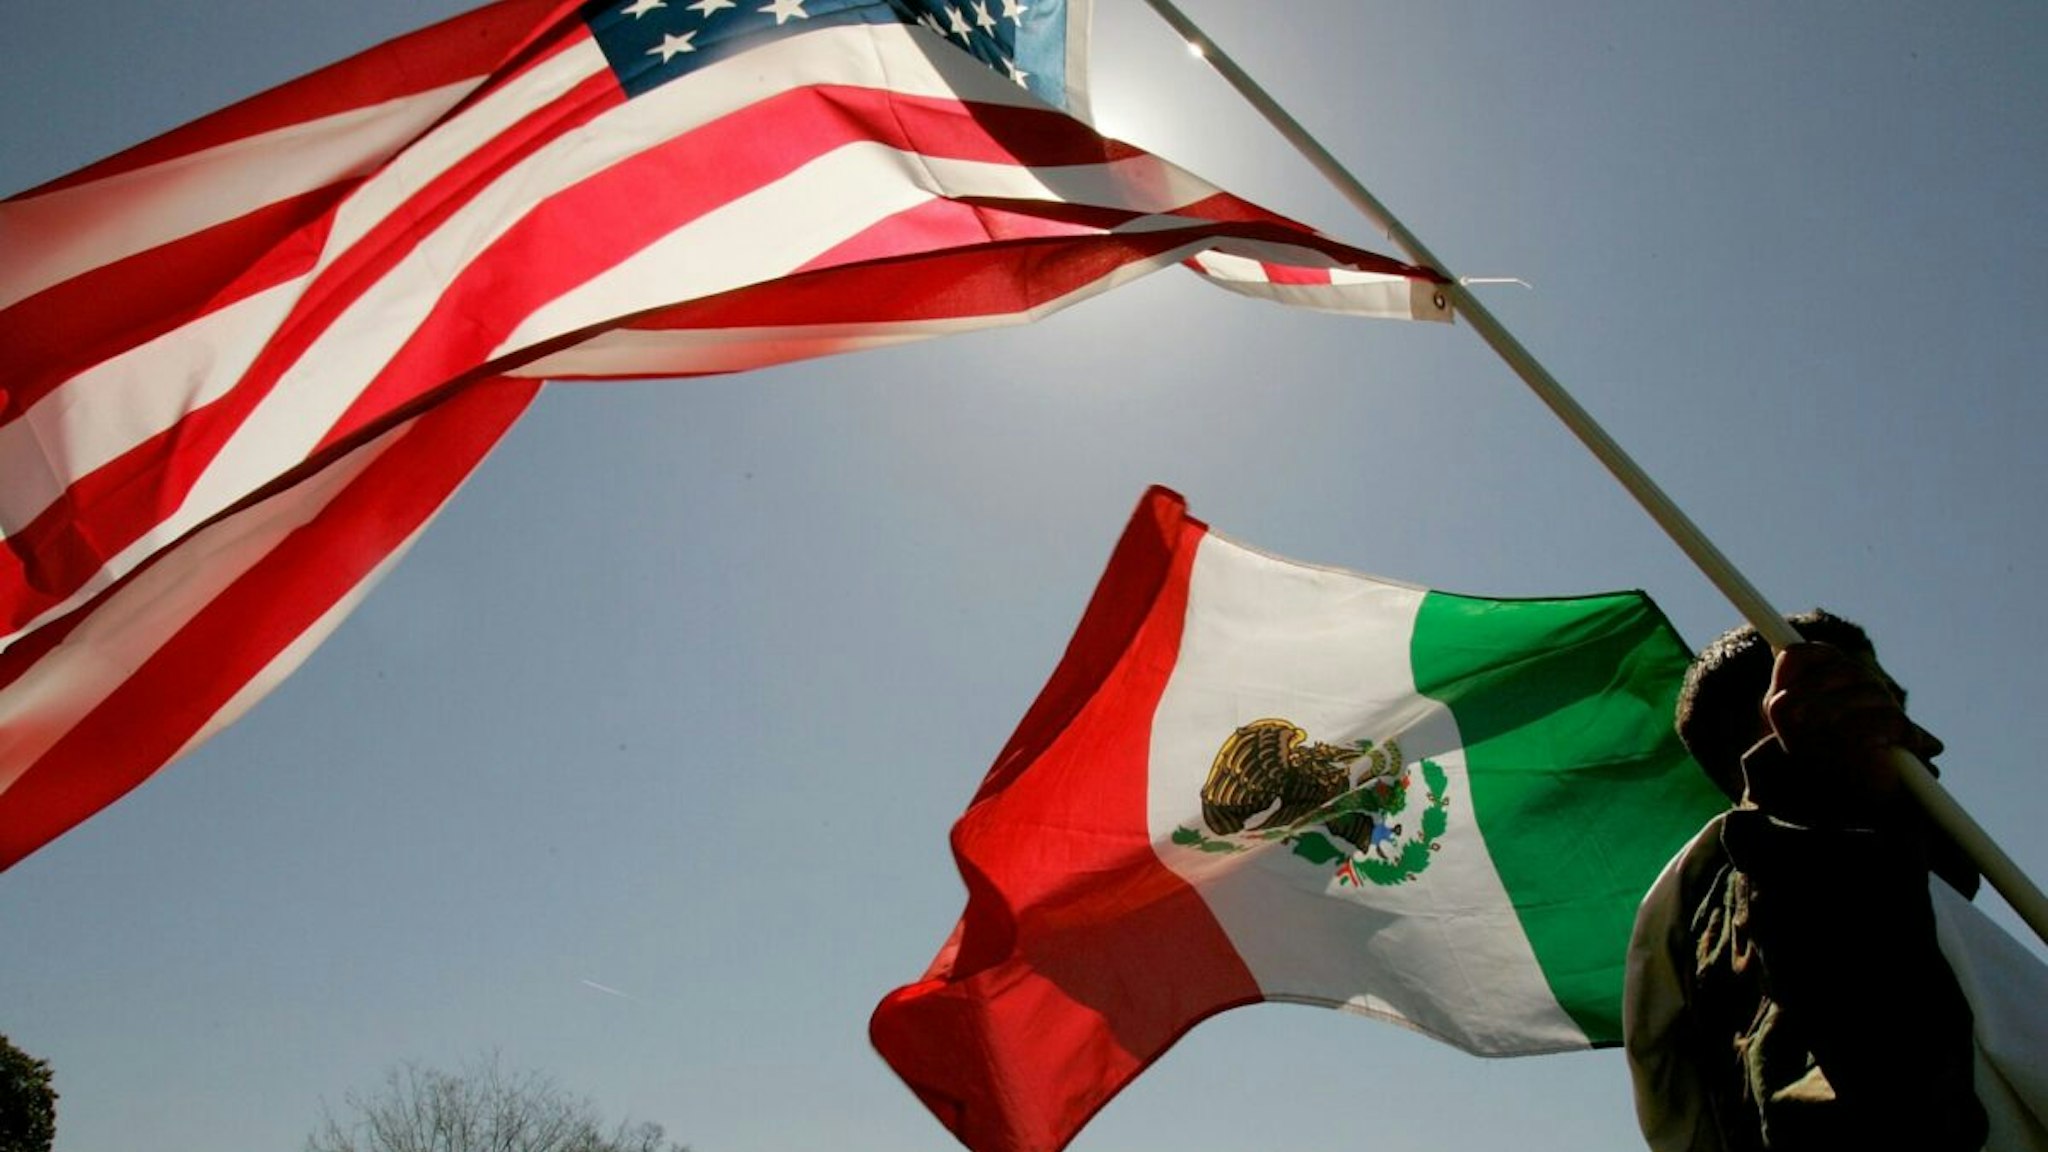 A protester holds an American flag and a Mexican flag while participating in a protest on the west front of the U.S. Capitol March 27, 2006 in Washington, DC